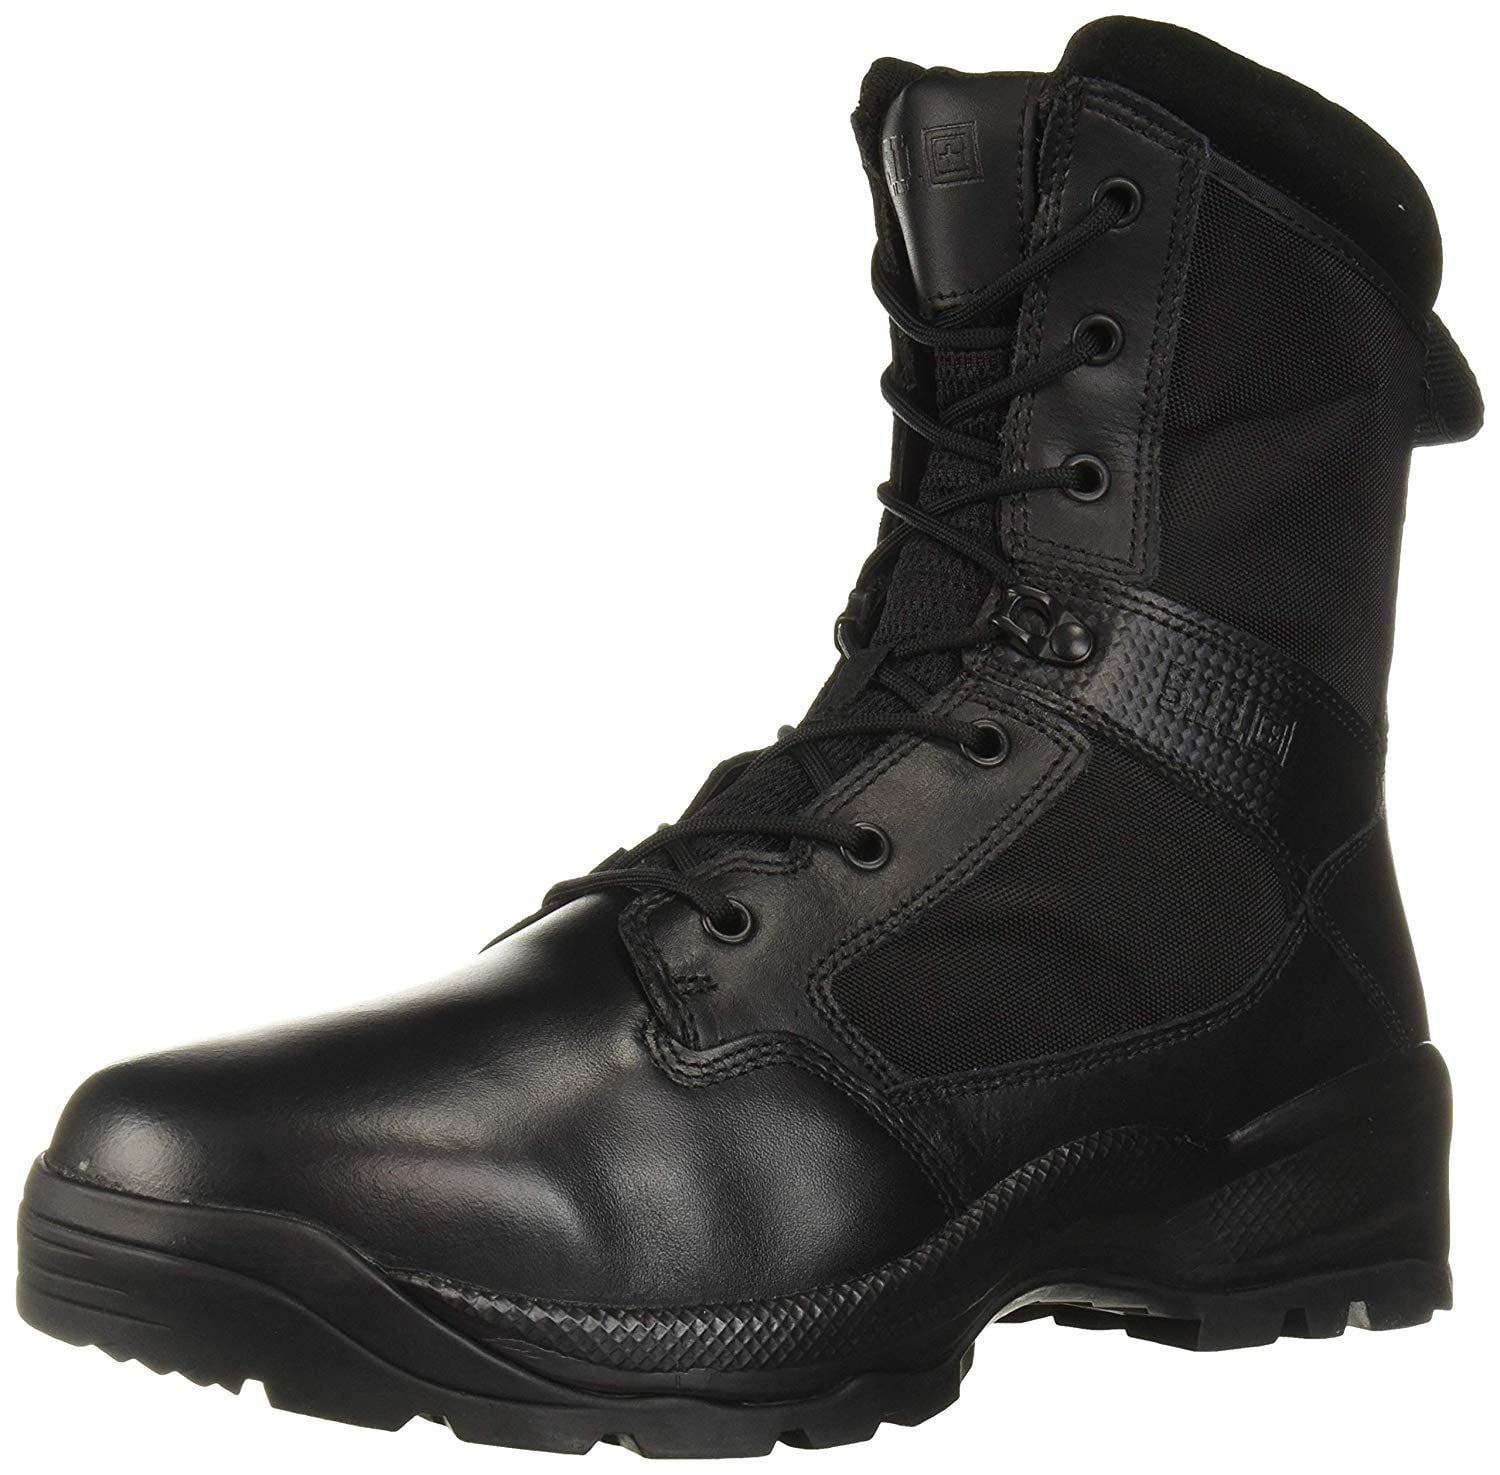 5.11 Men's ATAC 2.0 8 Military Tactical Boot Black Style 12391